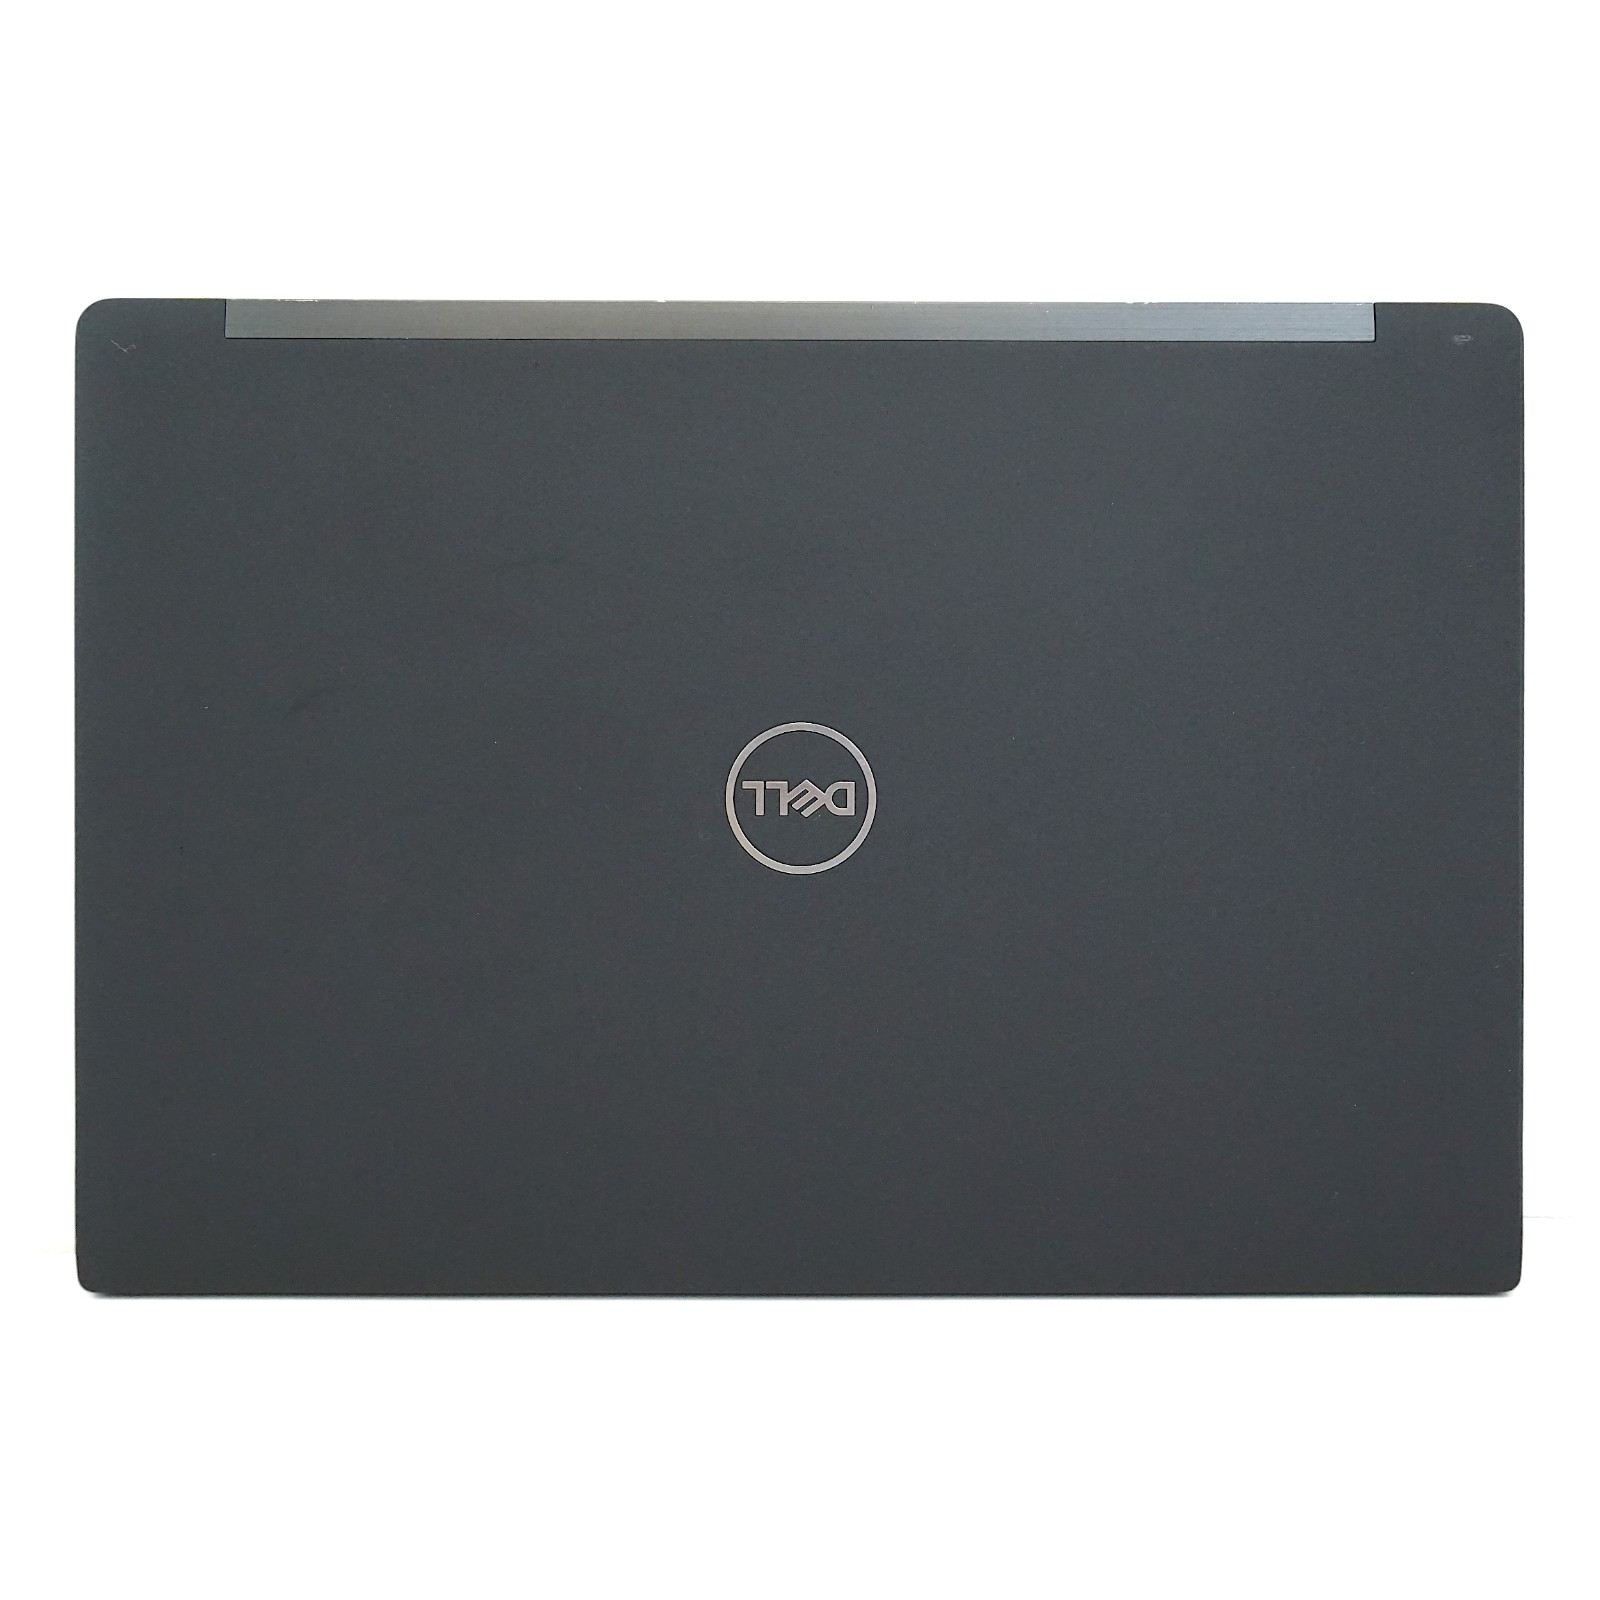 Dell Latitude 7290 12 Inch Laptop | Configure To Order